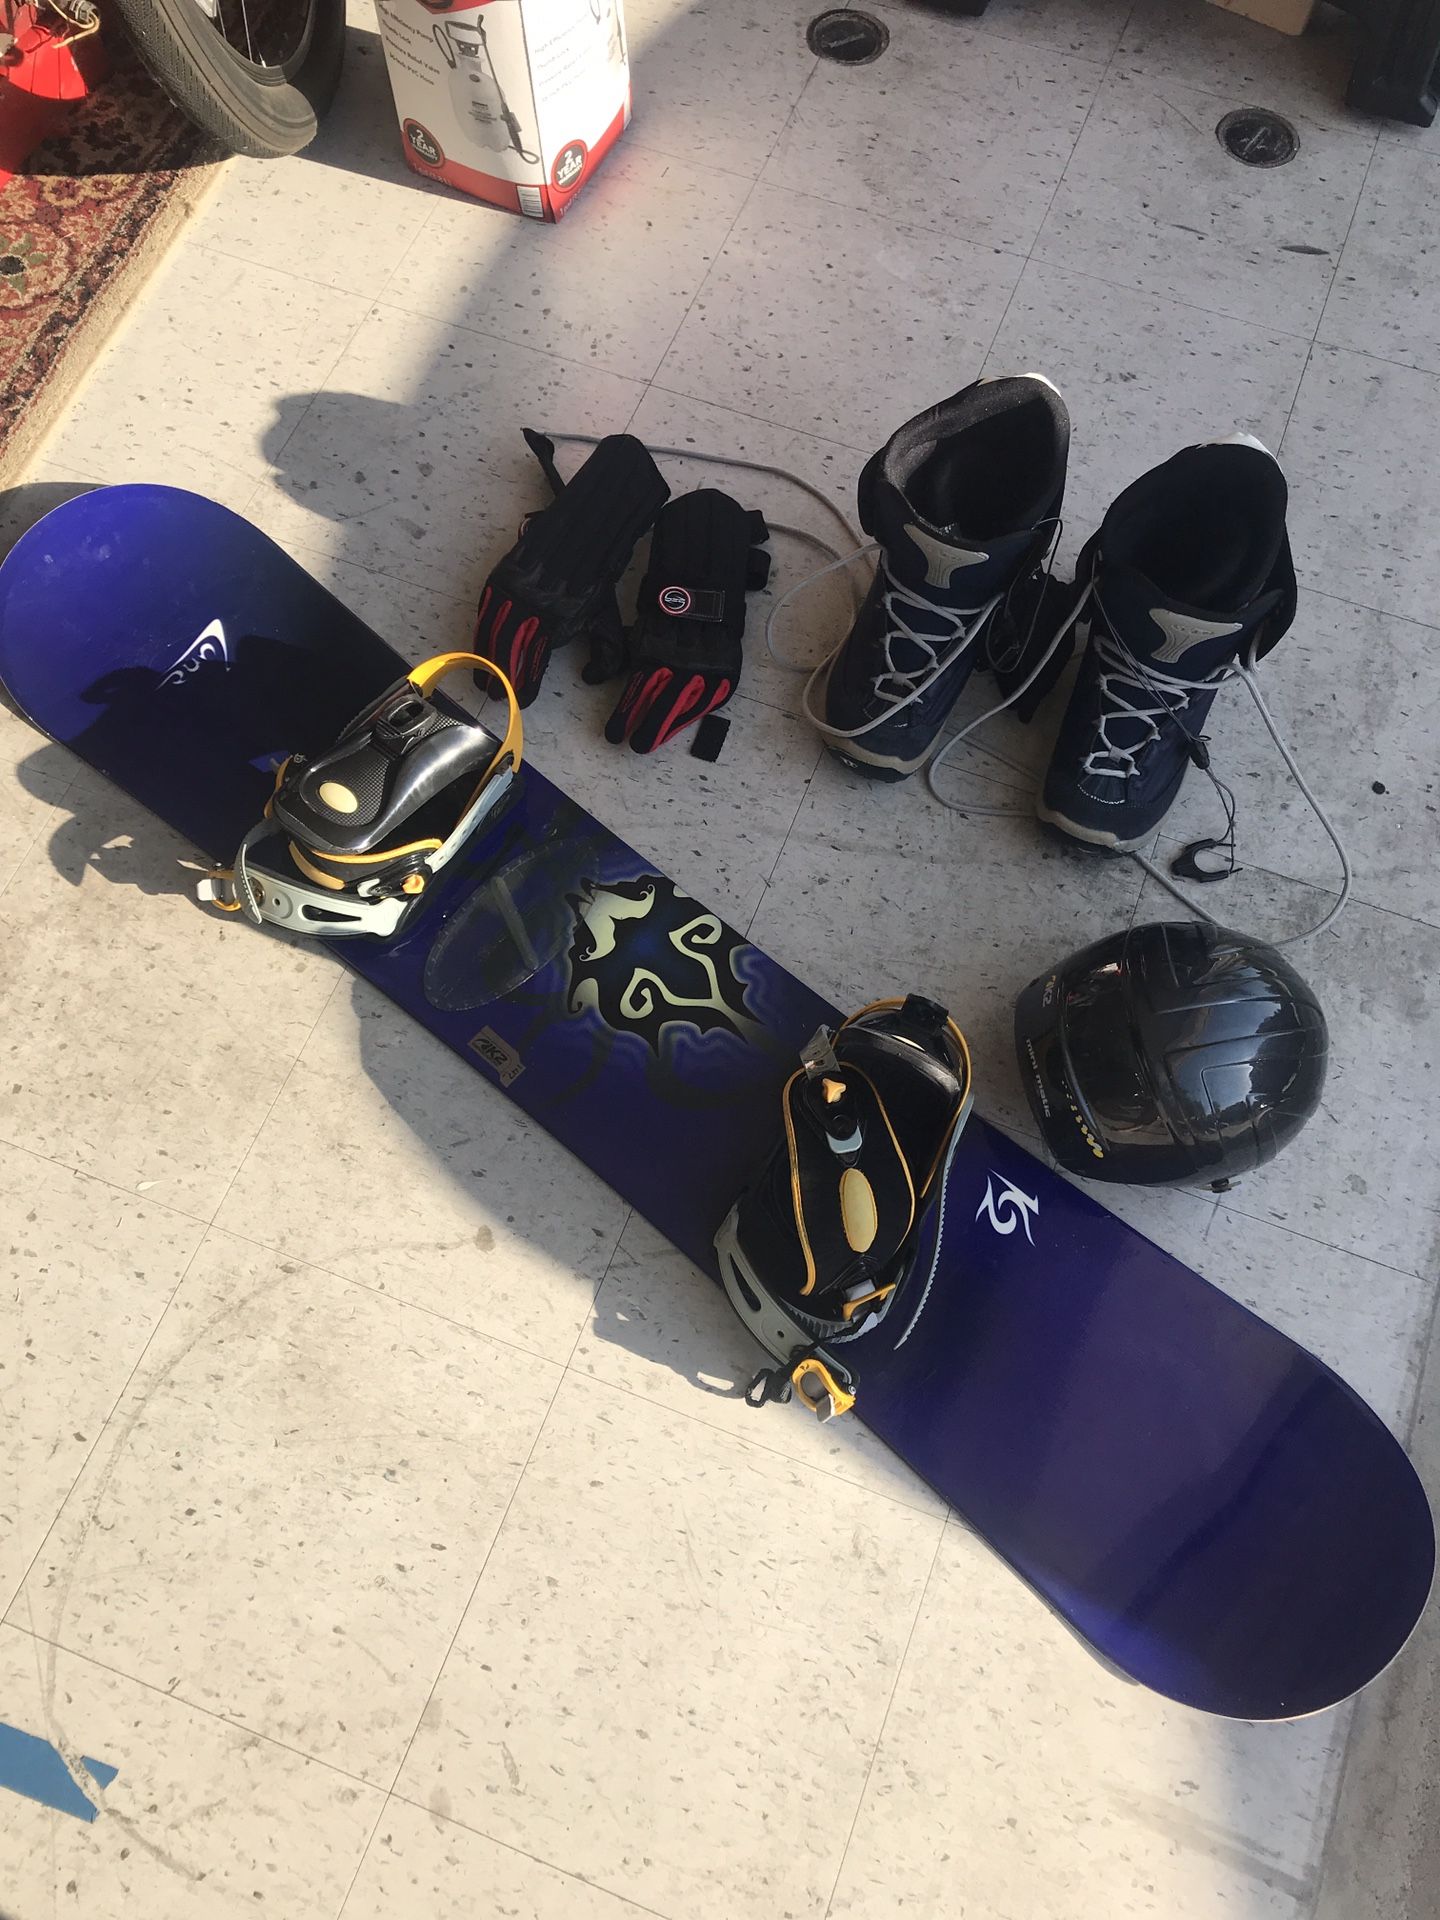 K2 snowboard, boots gloves and helmet with bag, good condition, gently used